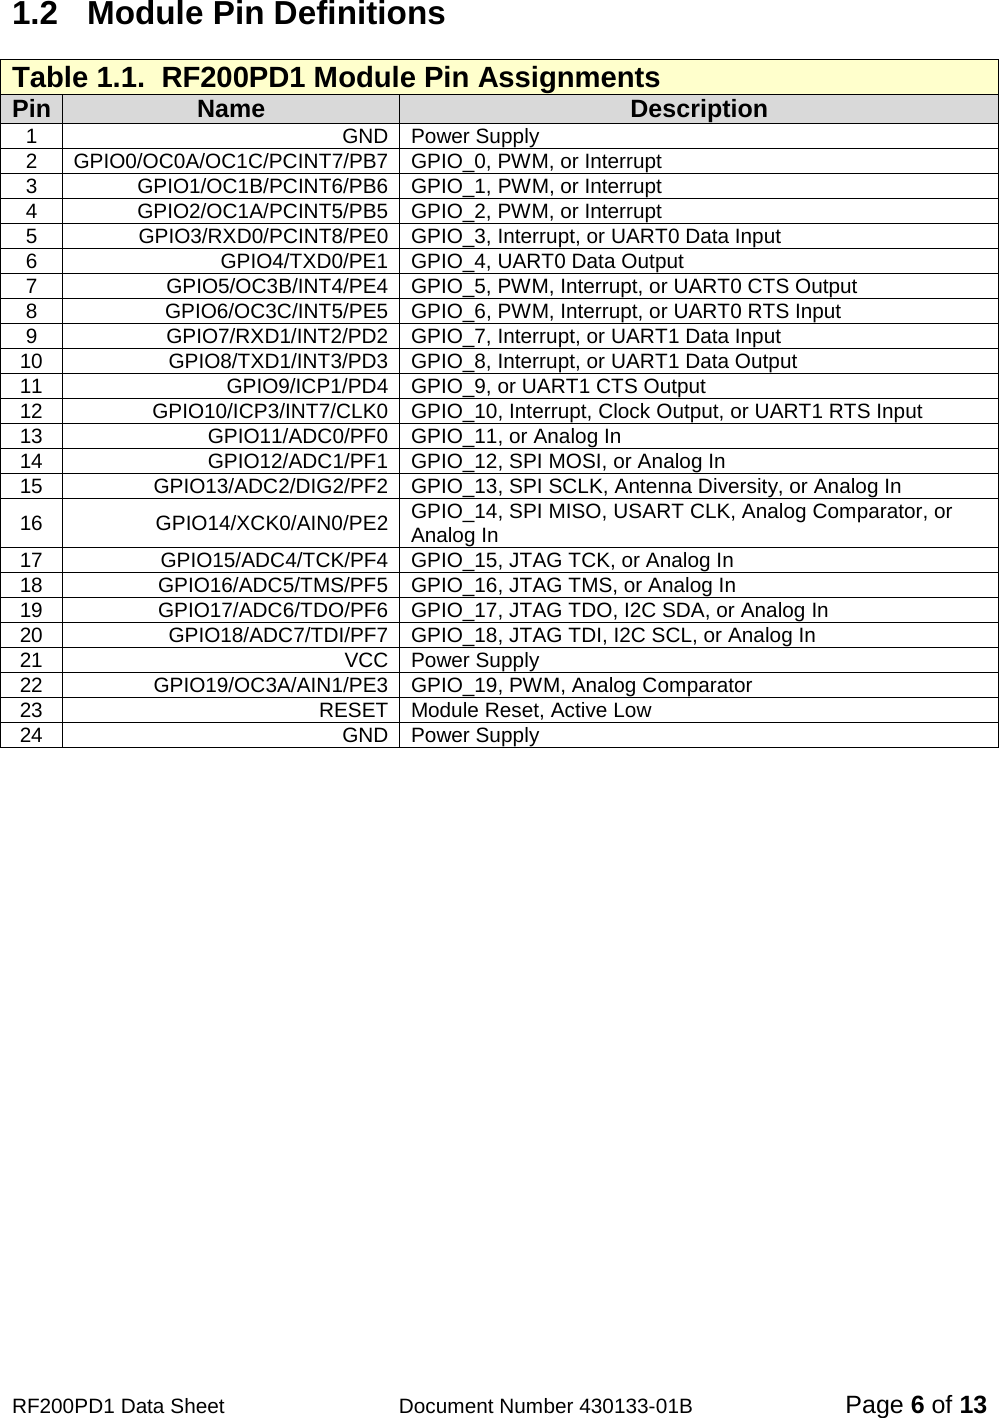                                            RF200PD1 Data Sheet                  Document Number 430133-01B  Page 6 of 13 1.2  Module Pin Definitions Table 1.1.  RF200PD1 Module Pin Assignments Pin Name Description 1 GND Power Supply 2 GPIO0/OC0A/OC1C/PCINT7/PB7 GPIO_0, PWM, or Interrupt 3 GPIO1/OC1B/PCINT6/PB6 GPIO_1, PWM, or Interrupt 4 GPIO2/OC1A/PCINT5/PB5 GPIO_2, PWM, or Interrupt  5 GPIO3/RXD0/PCINT8/PE0 GPIO_3, Interrupt, or UART0 Data Input 6 GPIO4/TXD0/PE1 GPIO_4, UART0 Data Output 7 GPIO5/OC3B/INT4/PE4 GPIO_5, PWM, Interrupt, or UART0 CTS Output 8 GPIO6/OC3C/INT5/PE5 GPIO_6, PWM, Interrupt, or UART0 RTS Input 9 GPIO7/RXD1/INT2/PD2 GPIO_7, Interrupt, or UART1 Data Input 10 GPIO8/TXD1/INT3/PD3 GPIO_8, Interrupt, or UART1 Data Output 11 GPIO9/ICP1/PD4   GPIO_9, or UART1 CTS Output 12 GPIO10/ICP3/INT7/CLK0 GPIO_10, Interrupt, Clock Output, or UART1 RTS Input 13 GPIO11/ADC0/PF0 GPIO_11, or Analog In 14 GPIO12/ADC1/PF1 GPIO_12, SPI MOSI, or Analog In 15 GPIO13/ADC2/DIG2/PF2 GPIO_13, SPI SCLK, Antenna Diversity, or Analog In 16 GPIO14/XCK0/AIN0/PE2 GPIO_14, SPI MISO, USART CLK, Analog Comparator, or Analog In 17 GPIO15/ADC4/TCK/PF4 GPIO_15, JTAG TCK, or Analog In 18 GPIO16/ADC5/TMS/PF5 GPIO_16, JTAG TMS, or Analog In 19 GPIO17/ADC6/TDO/PF6 GPIO_17, JTAG TDO, I2C SDA, or Analog In 20 GPIO18/ADC7/TDI/PF7 GPIO_18, JTAG TDI, I2C SCL, or Analog In 21  VCC Power Supply 22 GPIO19/OC3A/AIN1/PE3 GPIO_19, PWM, Analog Comparator 23 RESET Module Reset, Active Low 24 GND Power Supply    